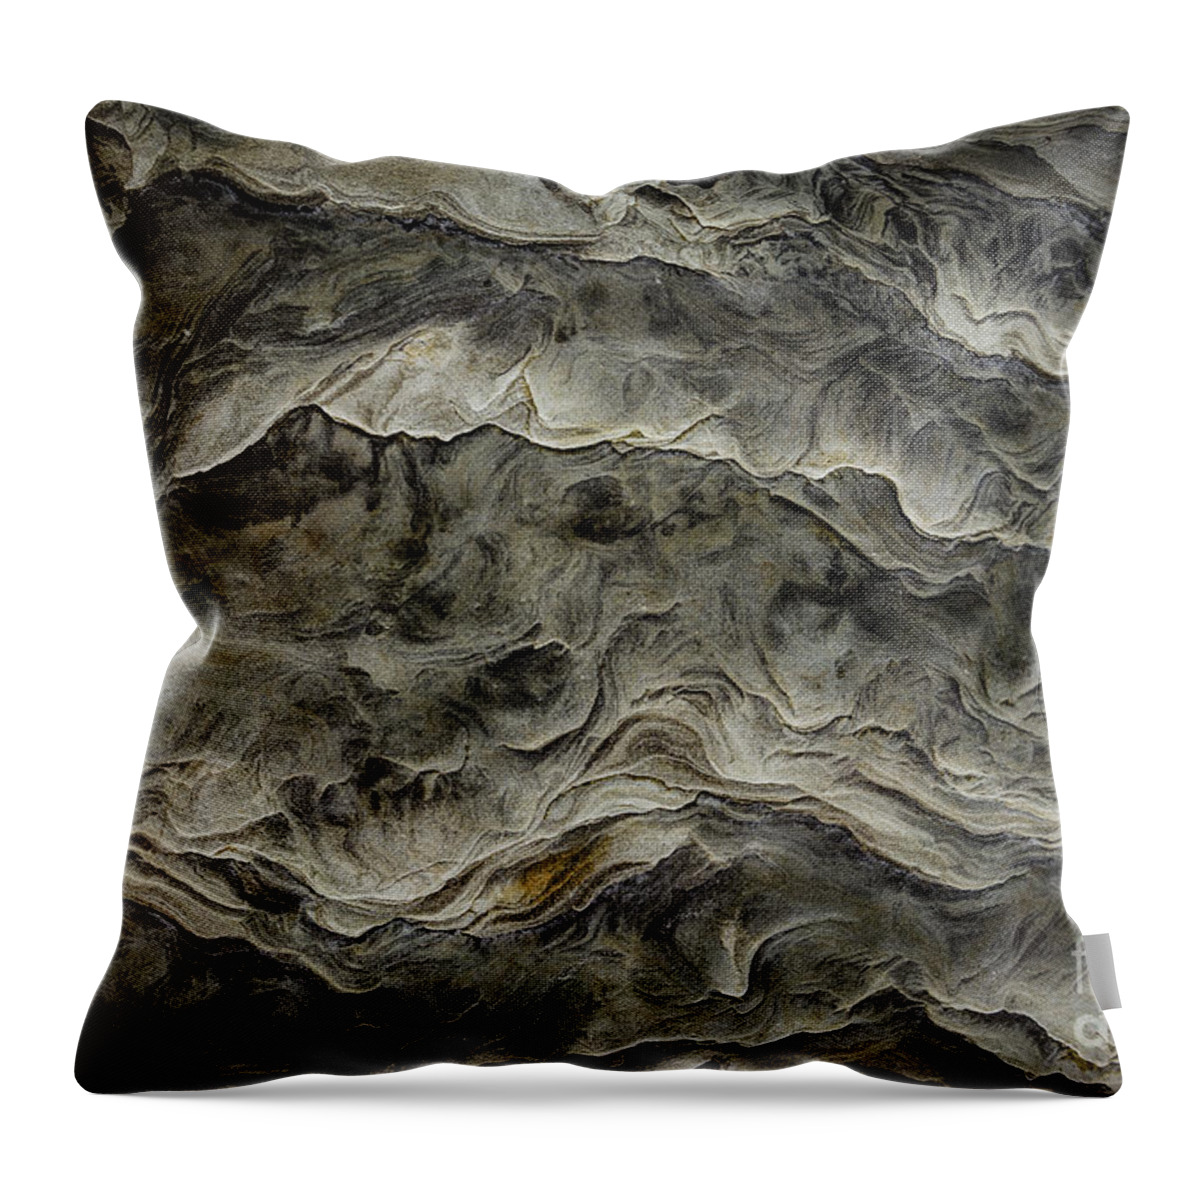 British Columbia Throw Pillow featuring the photograph Chaos by Carrie Cole